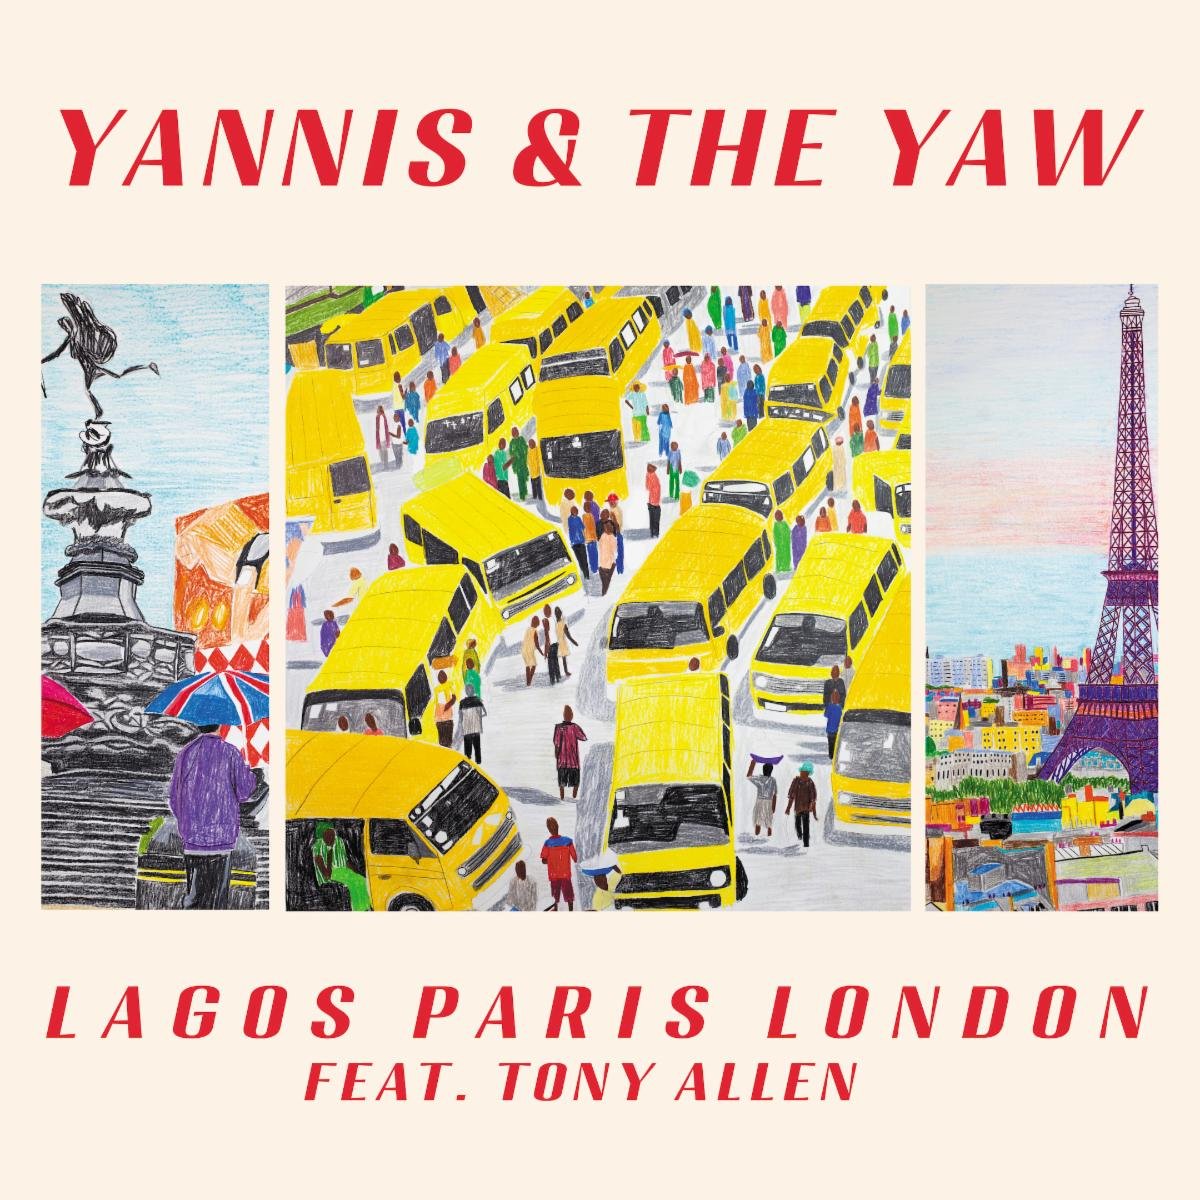 Best new music 💿 Yannis & The Yaw - the new project by @foals Yannis Philippakis - reveals new track. Lagos Paris London is out Aug 30 via @transgressiveHQ. Watch the video for Walk Through Fire ft. Tony Allen 📽️ tinyurl.com/mt7b87tr @yannisandtheyaw play @KOKOLondon 13/9.